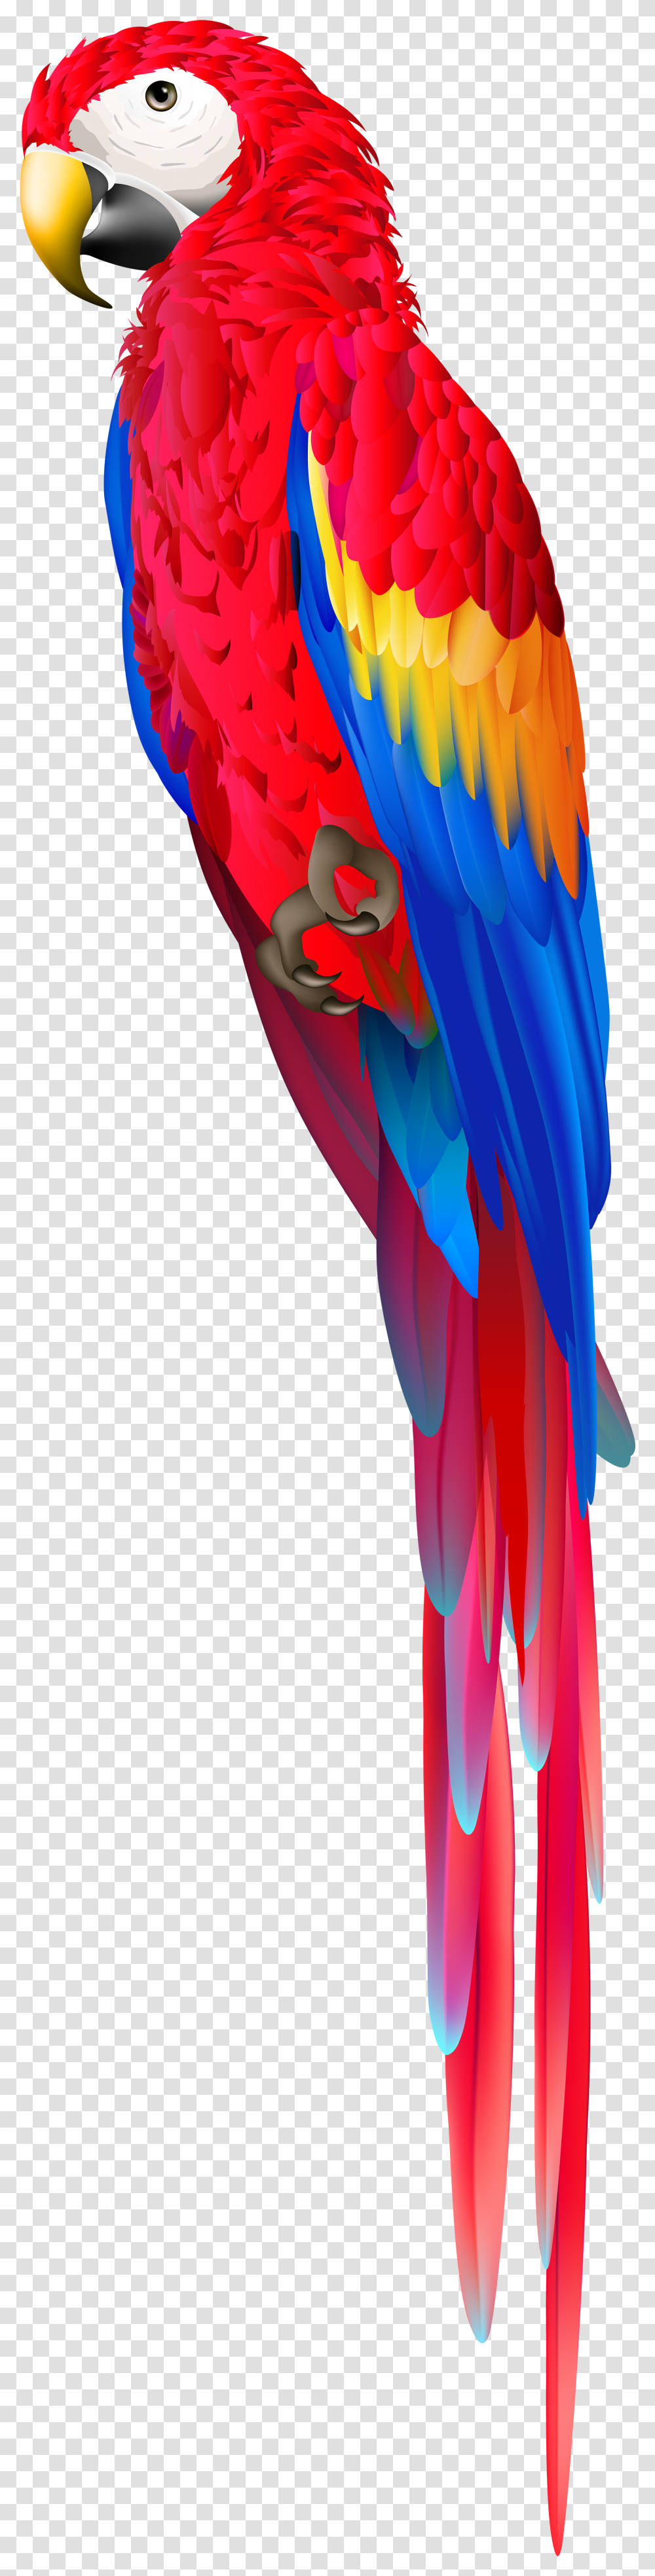 Red Parrot Clipart Red Parrot, Bird, Animal, Flying Transparent Png